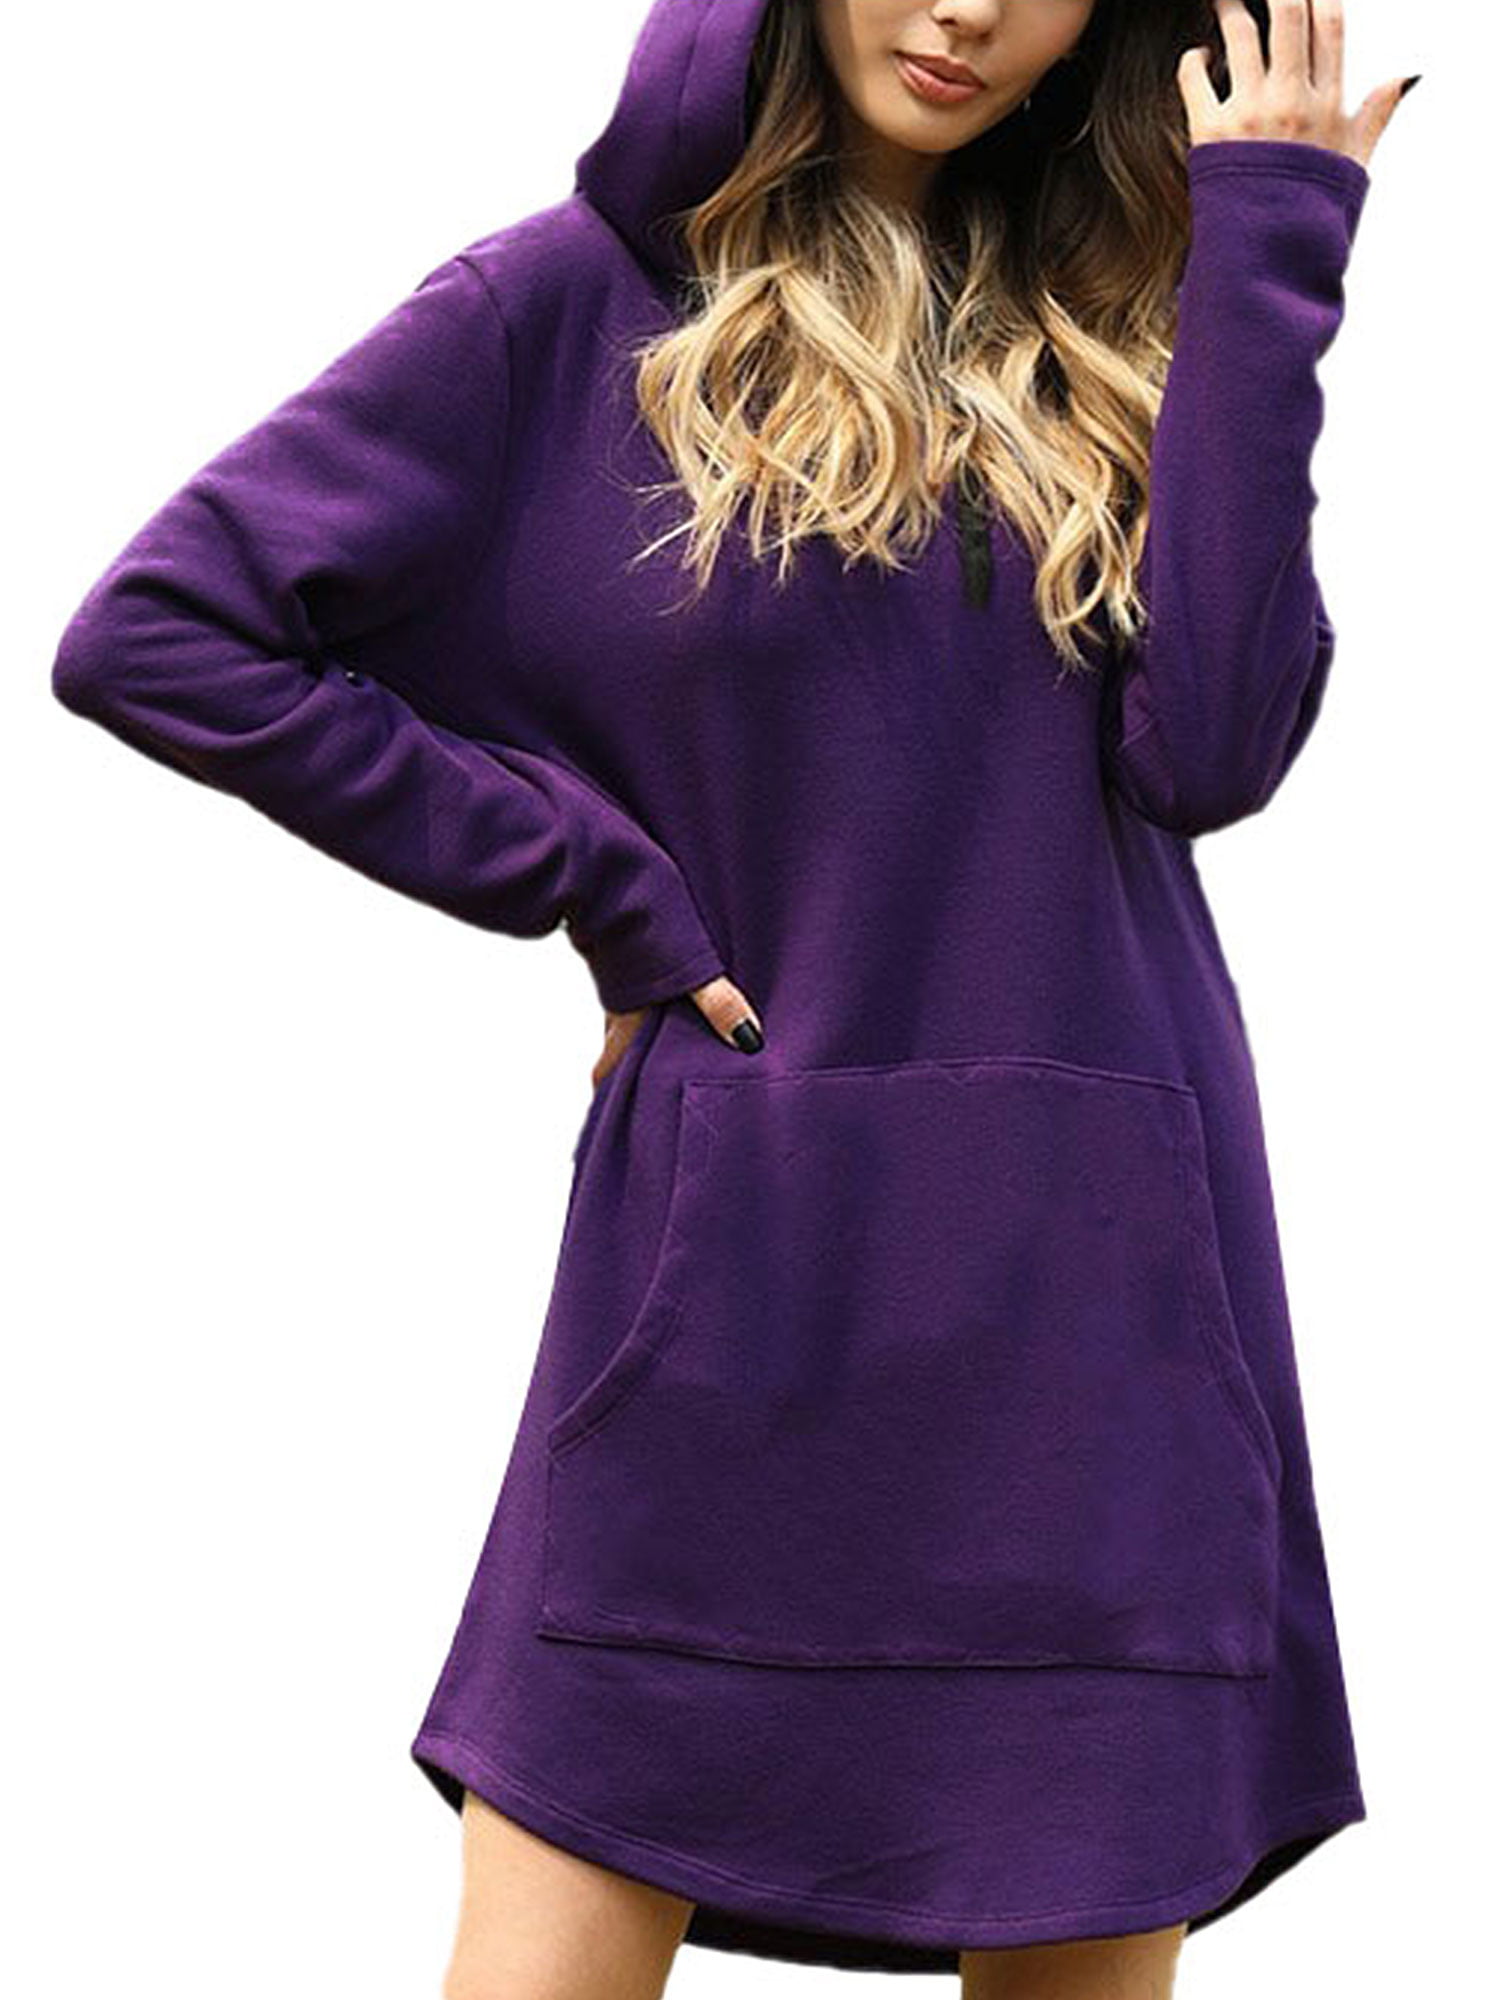 ovticza Hoodies for Women Casual Long Sleeve Hooded Tunic Sweatshirts Dress Solid Color Drawstring Pullover with Pocket 